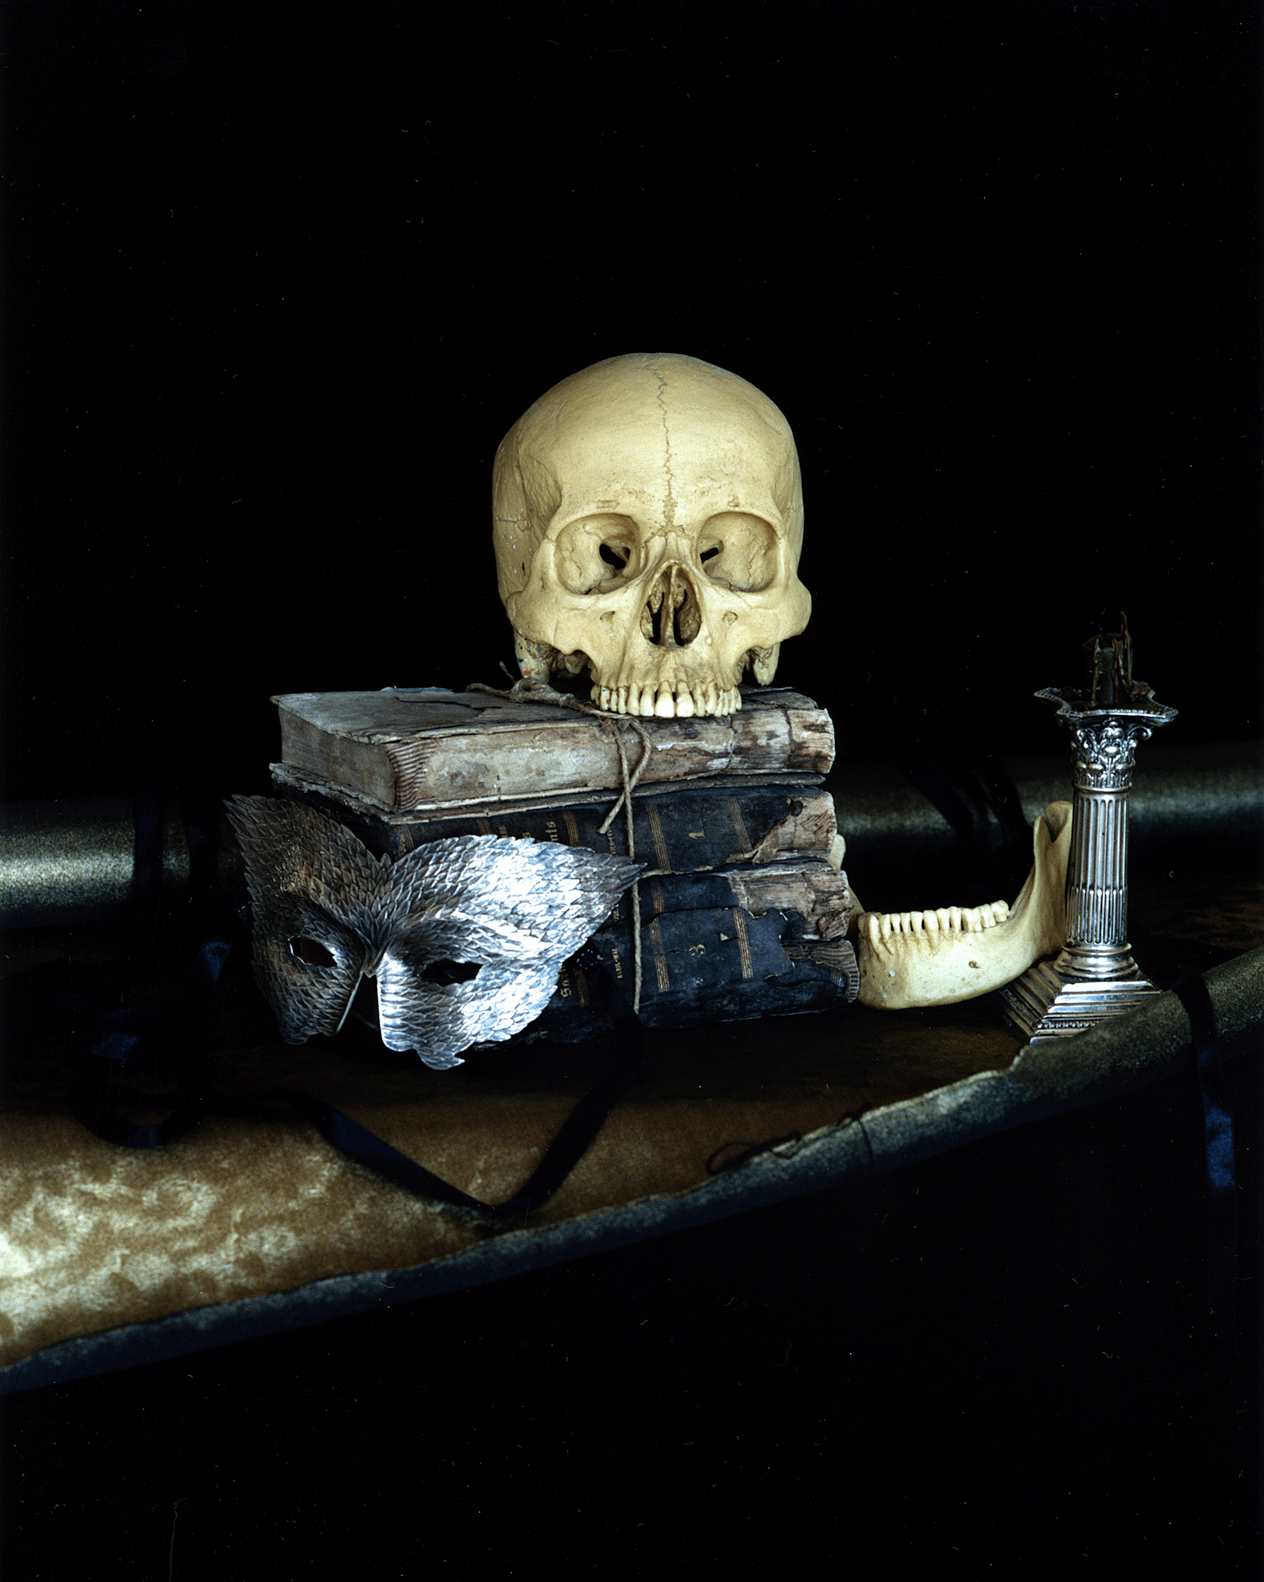 Still Life with a Skull and a Silver Mask, Paris, 2007